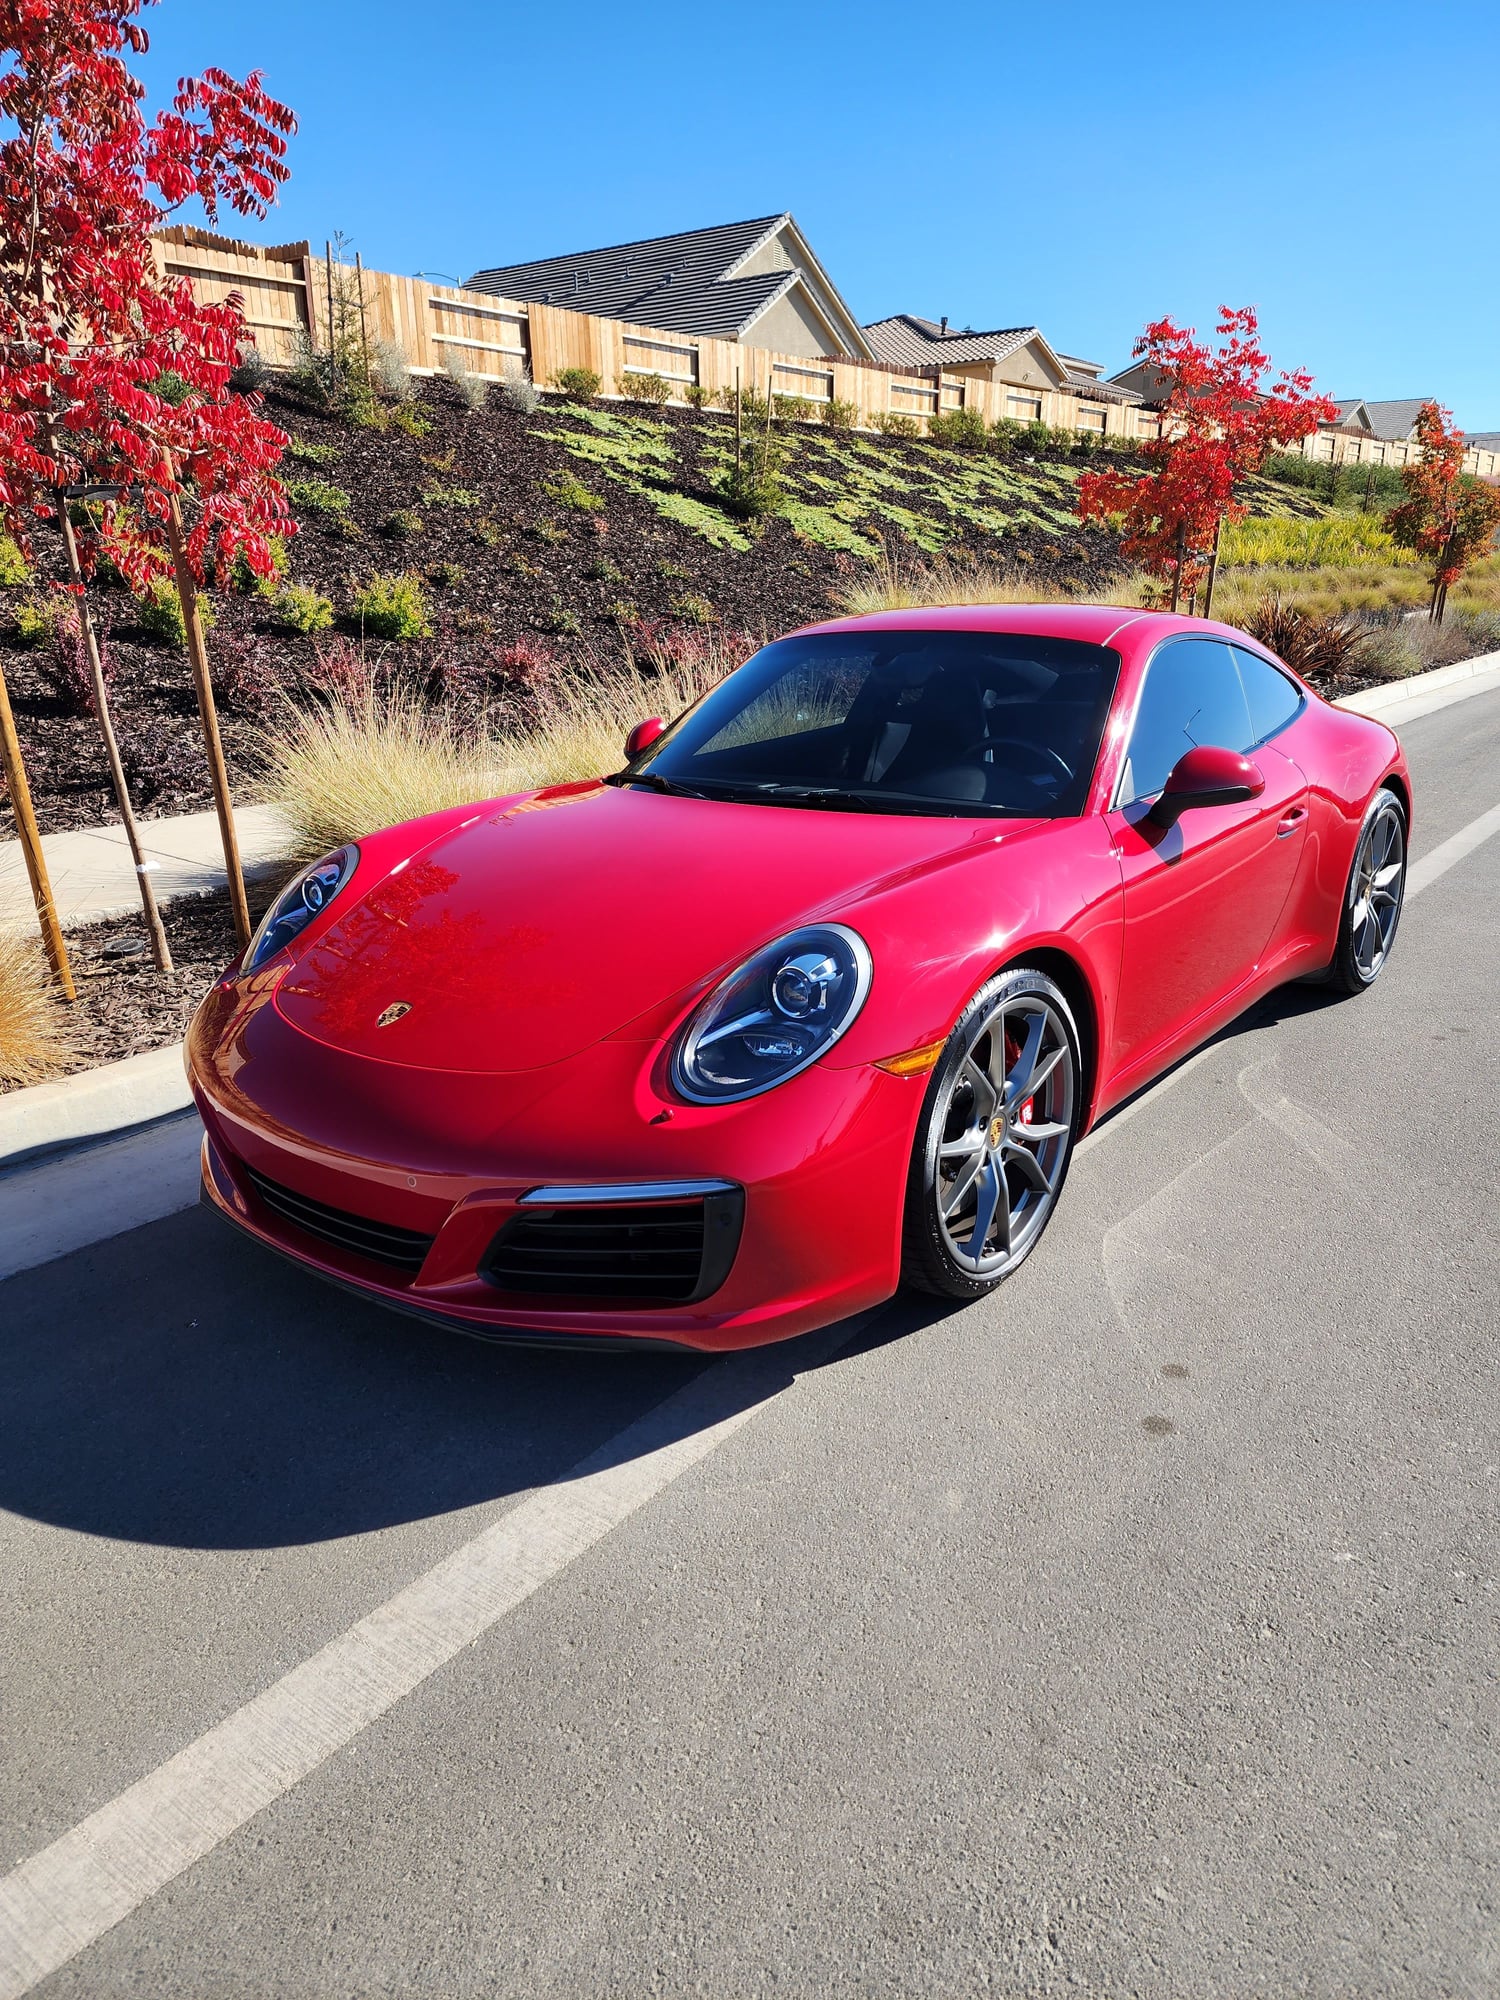 2017 Porsche 911 - 2017 Base Carrera, Carmine red, 40K miles - Used - VIN WP0AA2A95HS106910 - 41,000 Miles - 6 cyl - 2WD - Automatic - Coupe - Red - Hollister, CA 95023, United States